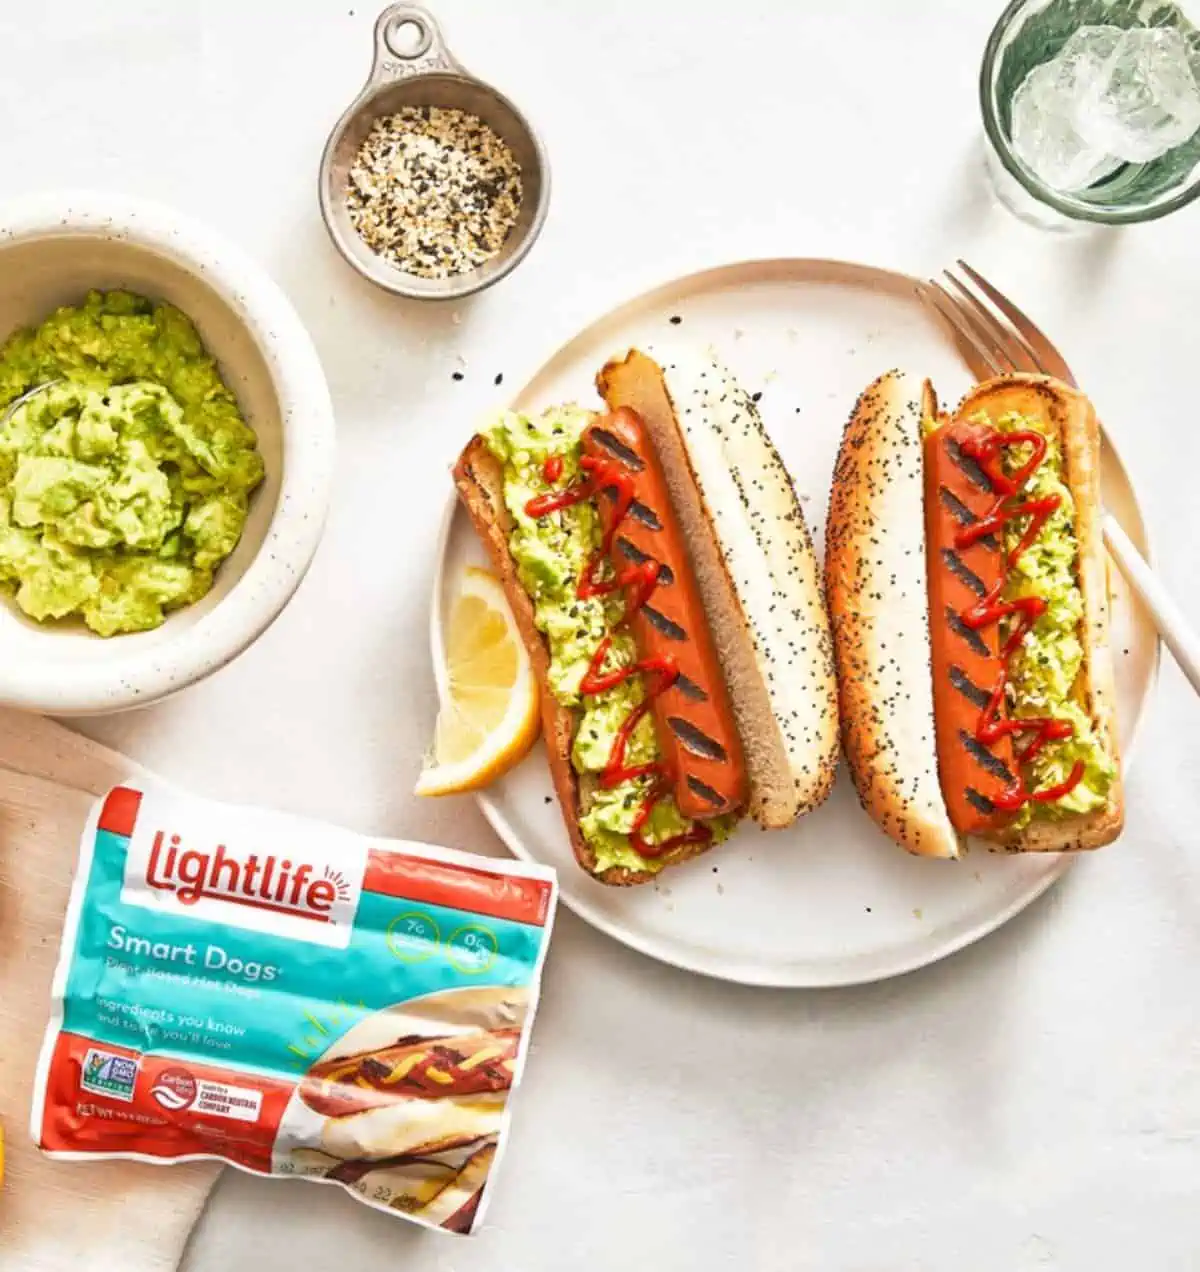 A package of Lightlife Smart Dogs next to a plate with two vegan hot dogs in buns topped with guacamole.